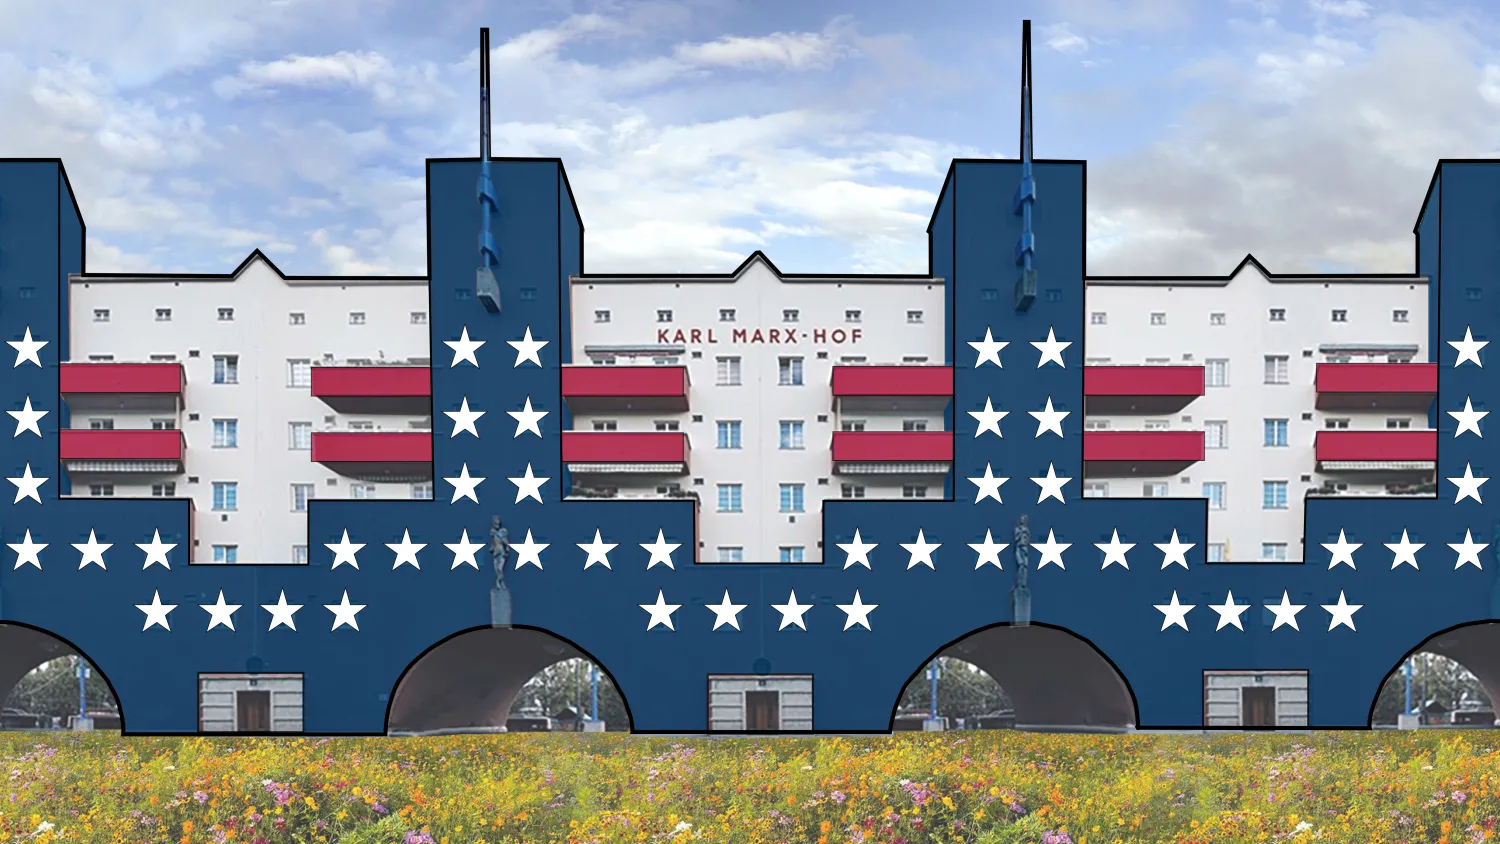 Exterior of Karl Marx Hoff Collage with graphics of red, white and blue on it.